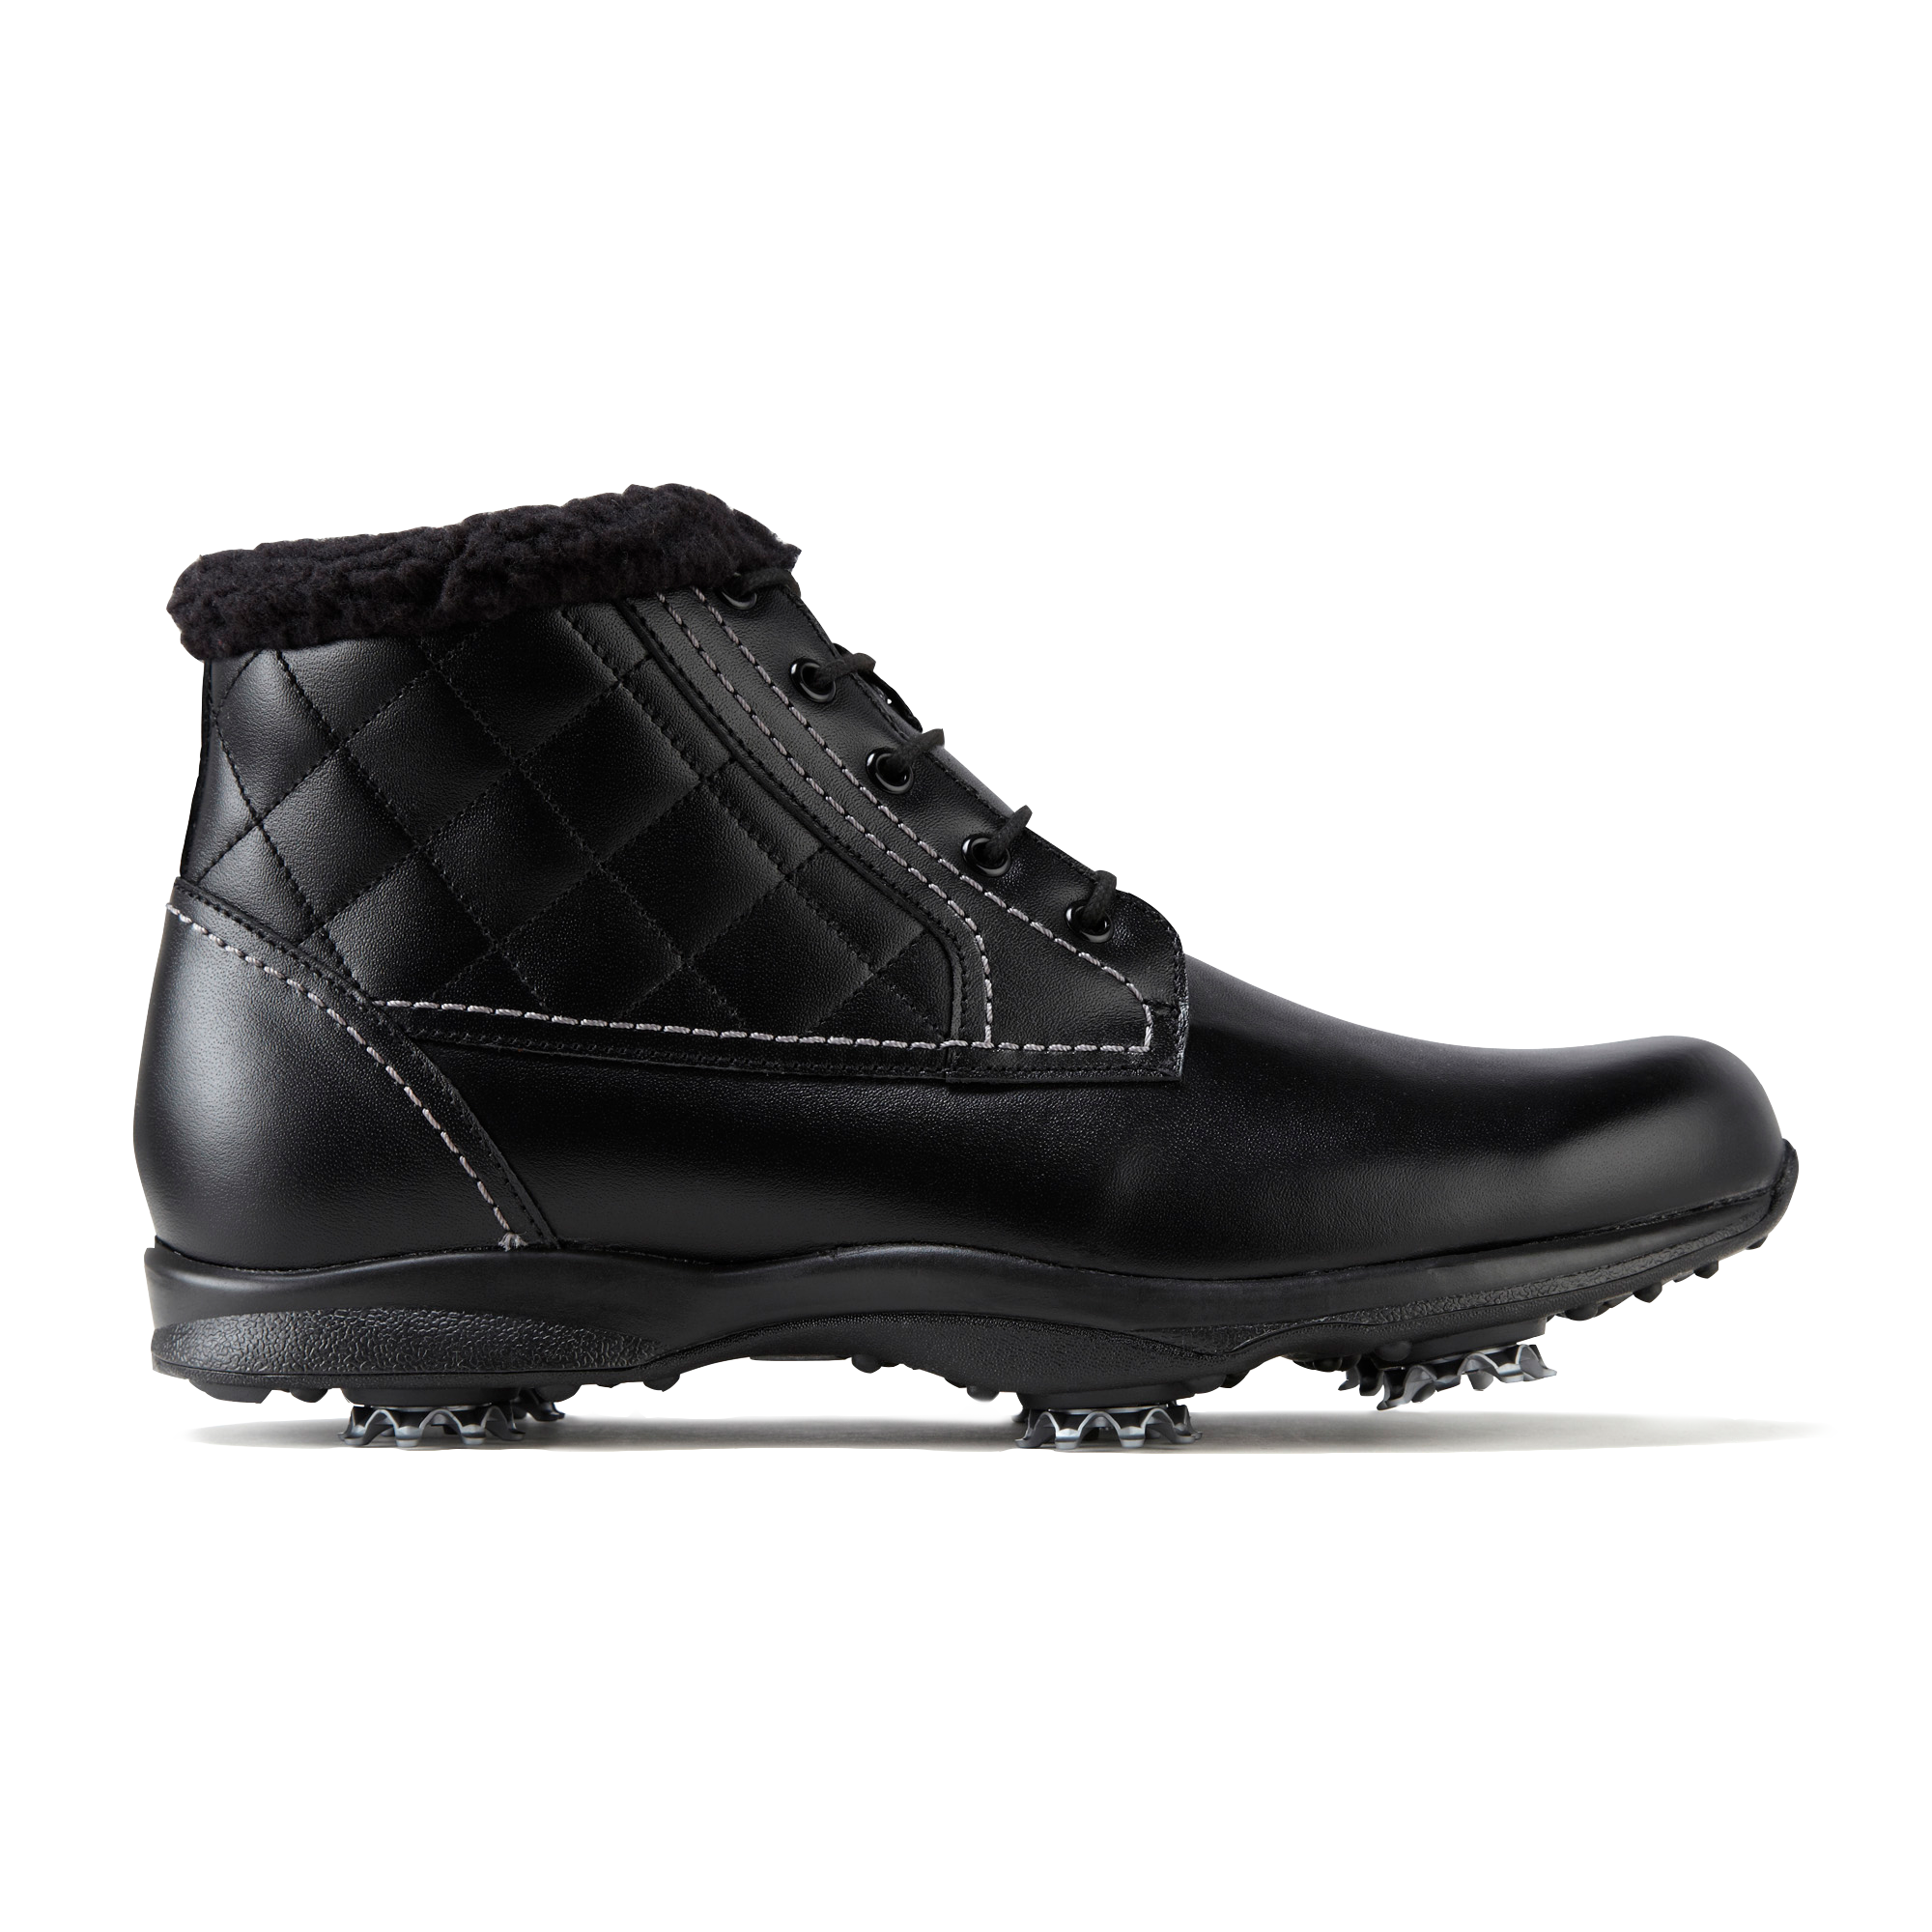 footjoy winter golf boots for sale